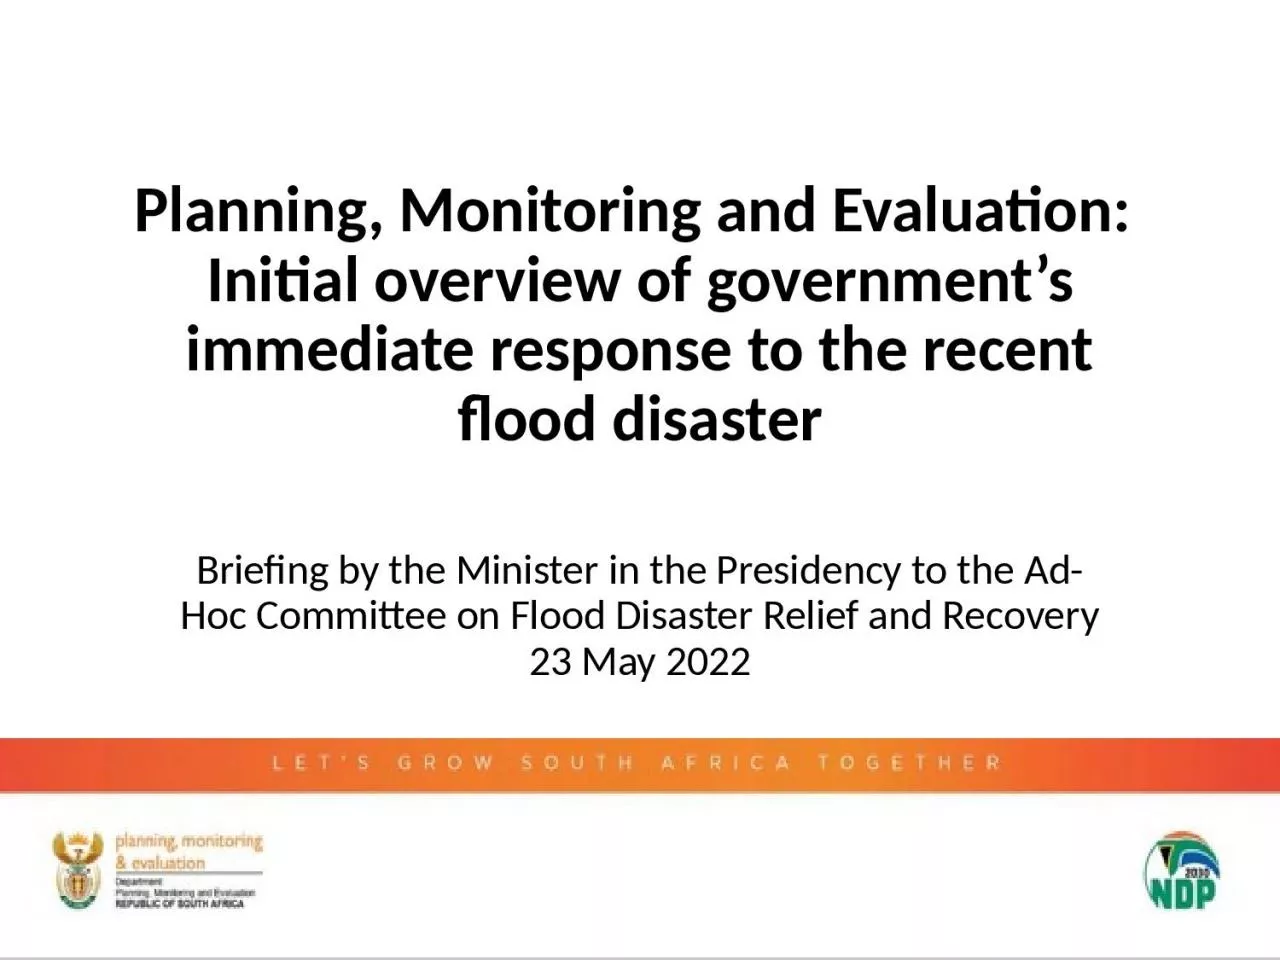 Planning, Monitoring and Evaluation: